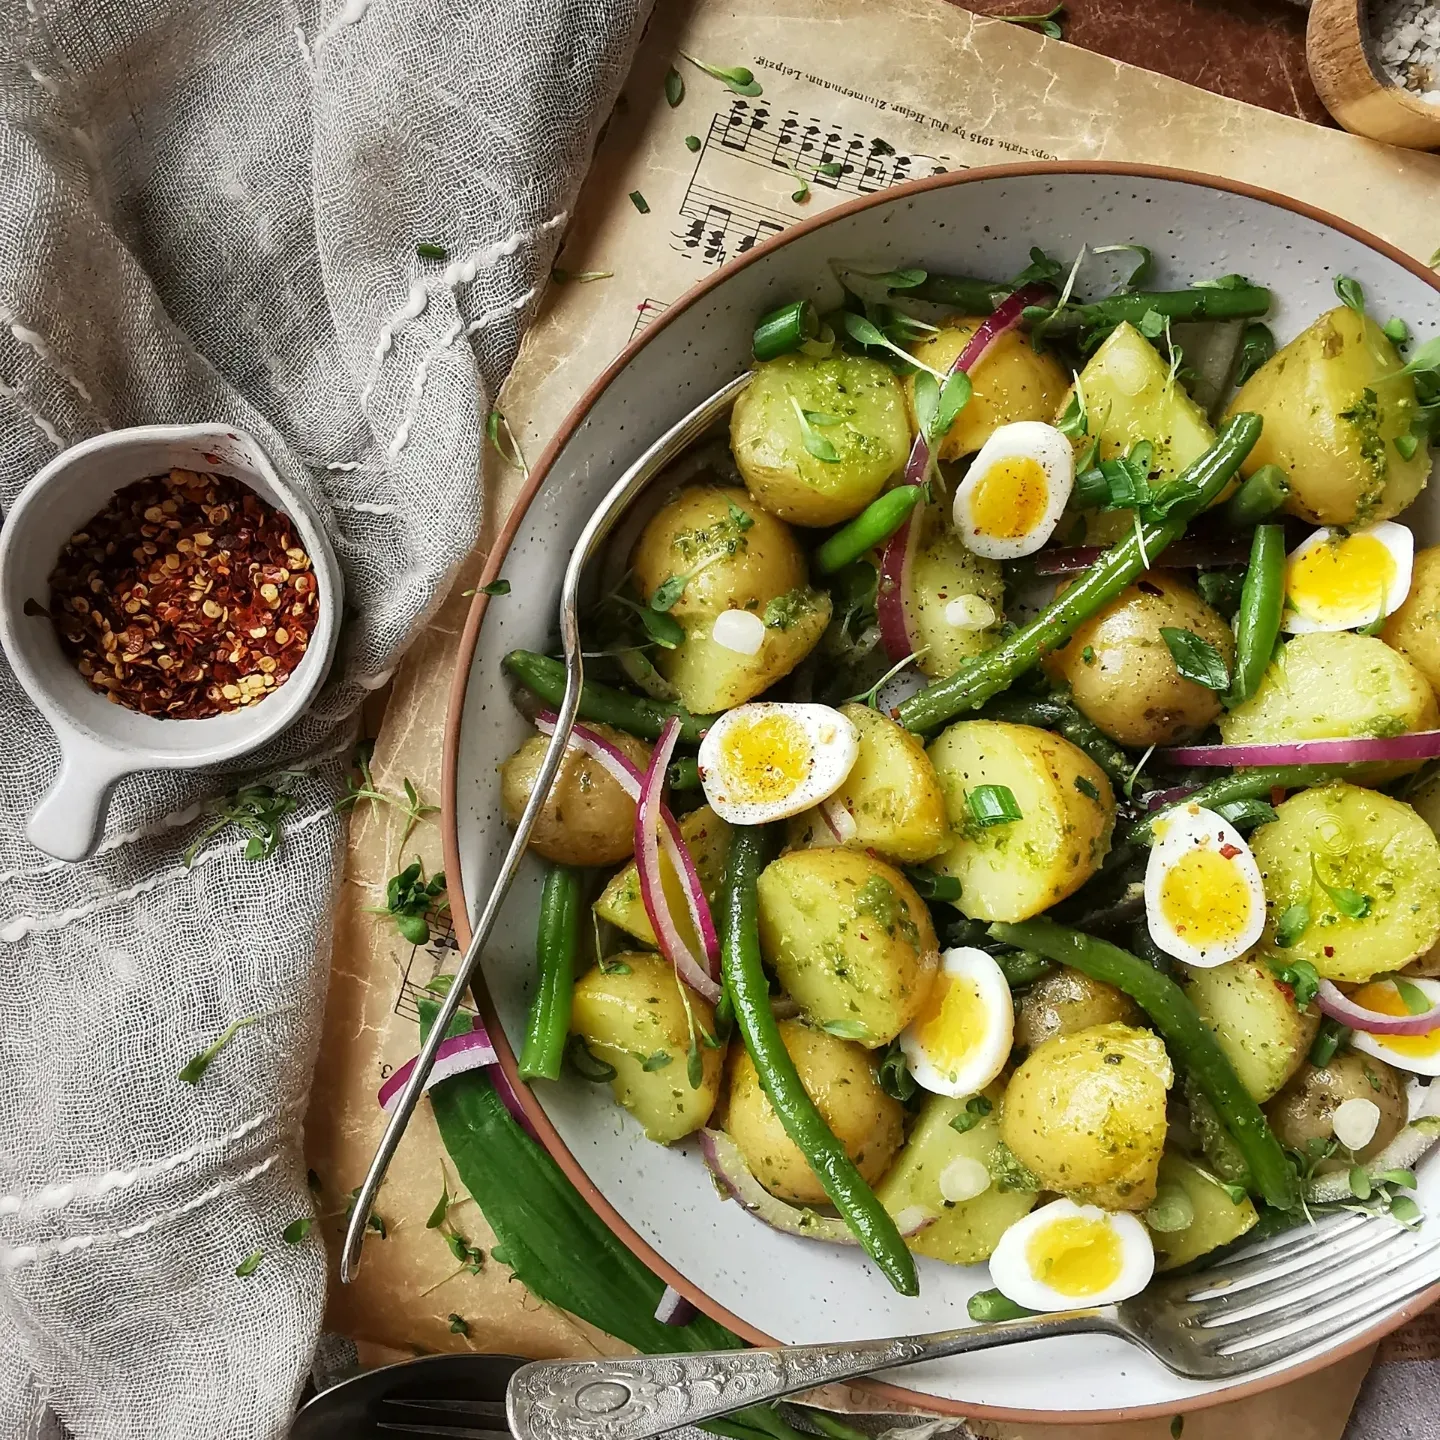 Warm potato salad with green beans, quail eggs and red onion